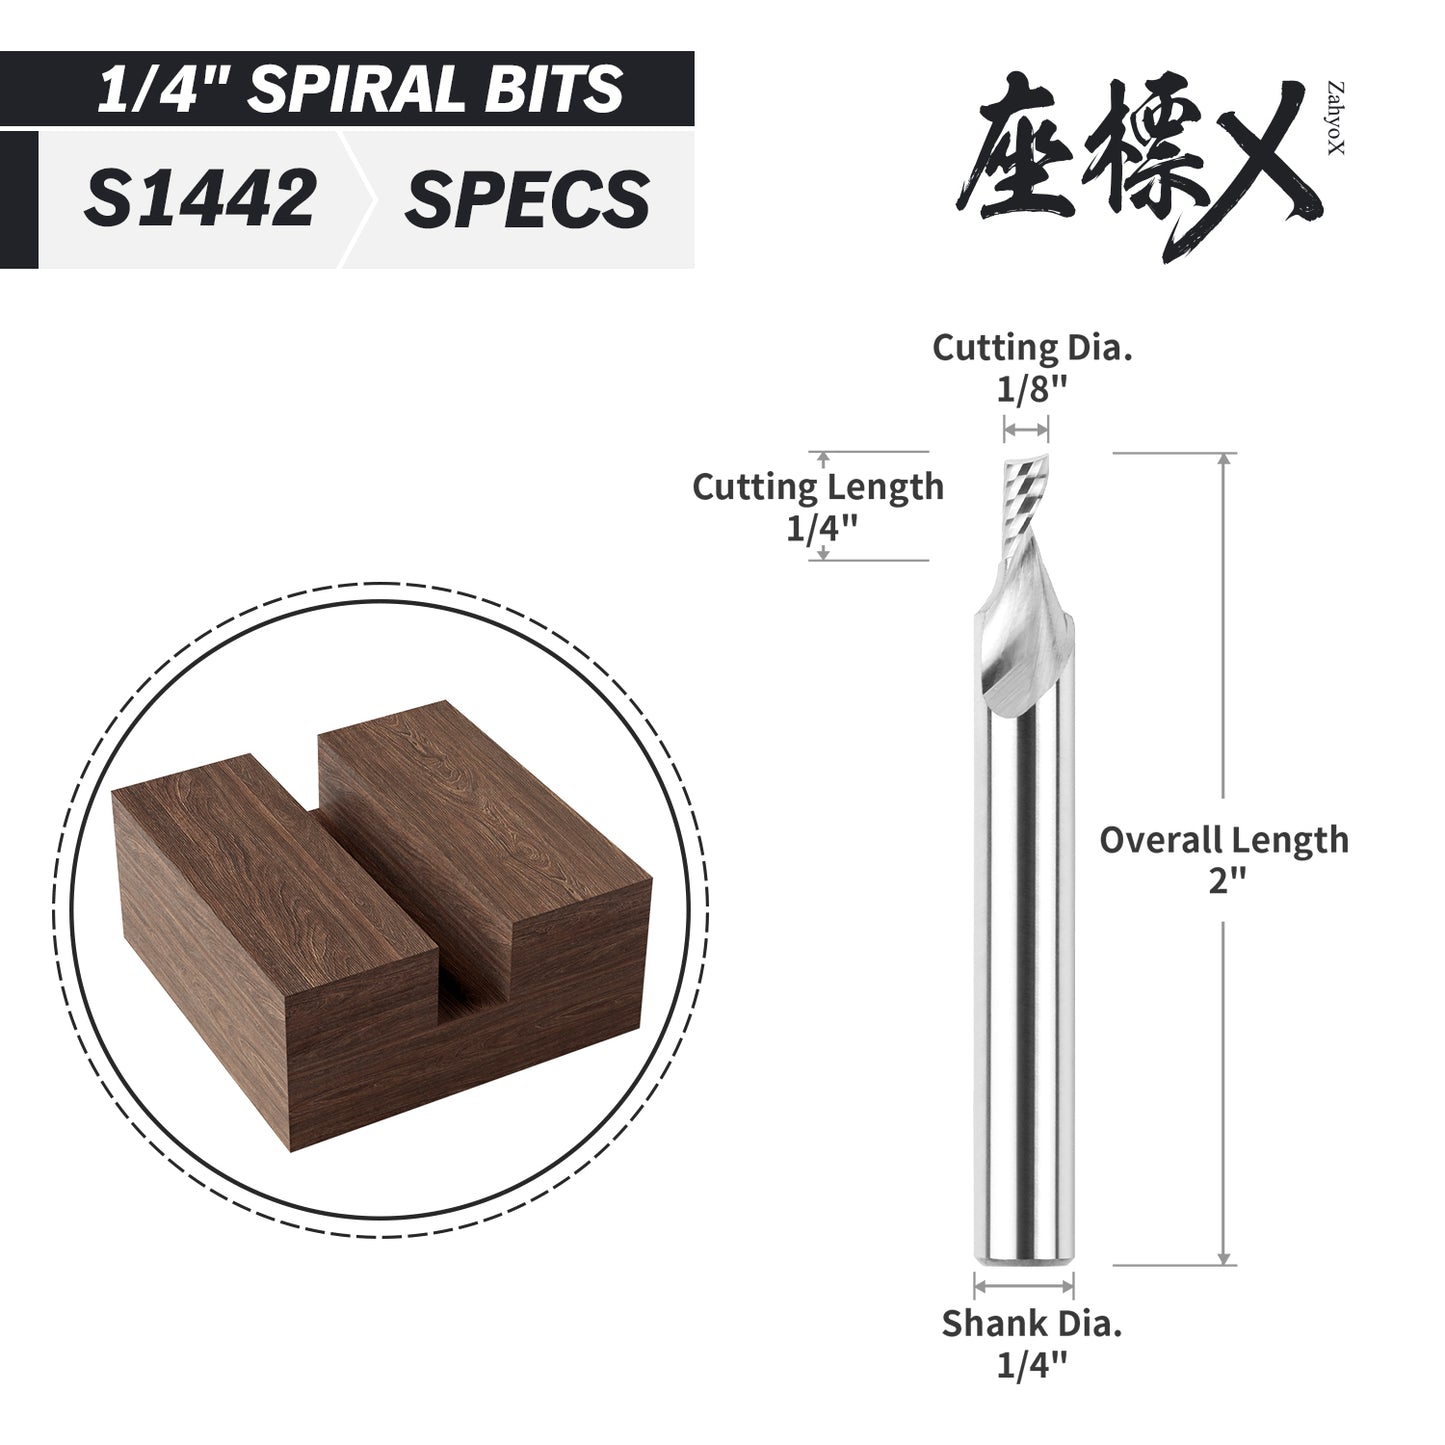 S1442 Solid Carbide Upcut Spiral Router Bit - O Flutes - 1/8 CD - 1/4 SD - 1/4 CL - 2 OL